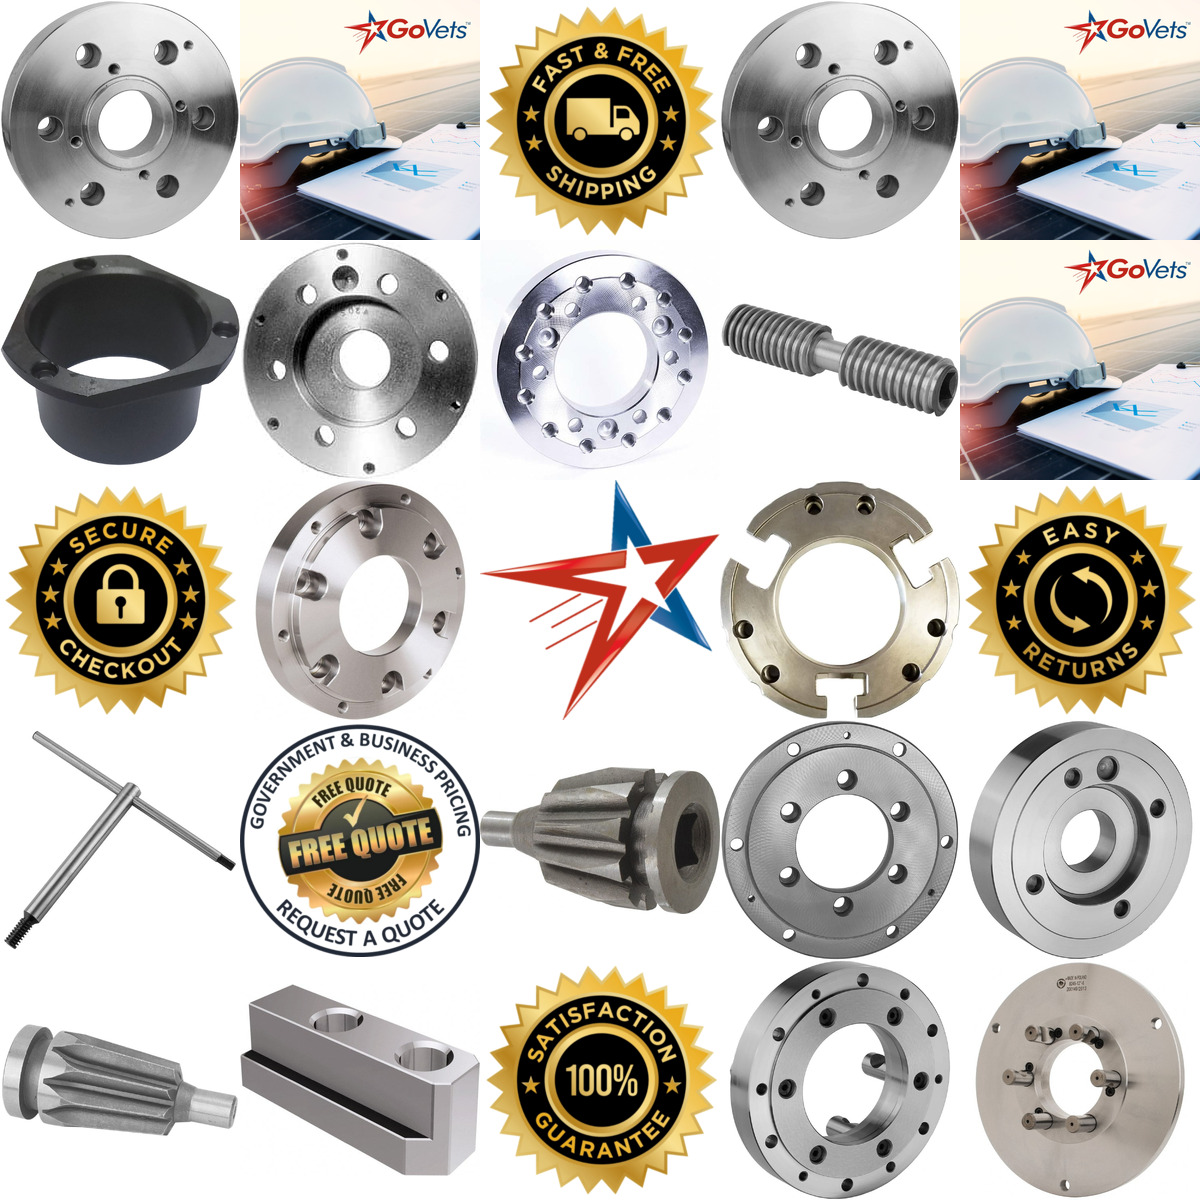 A selection of Lathe Chuck Parts and Accessories products on GoVets